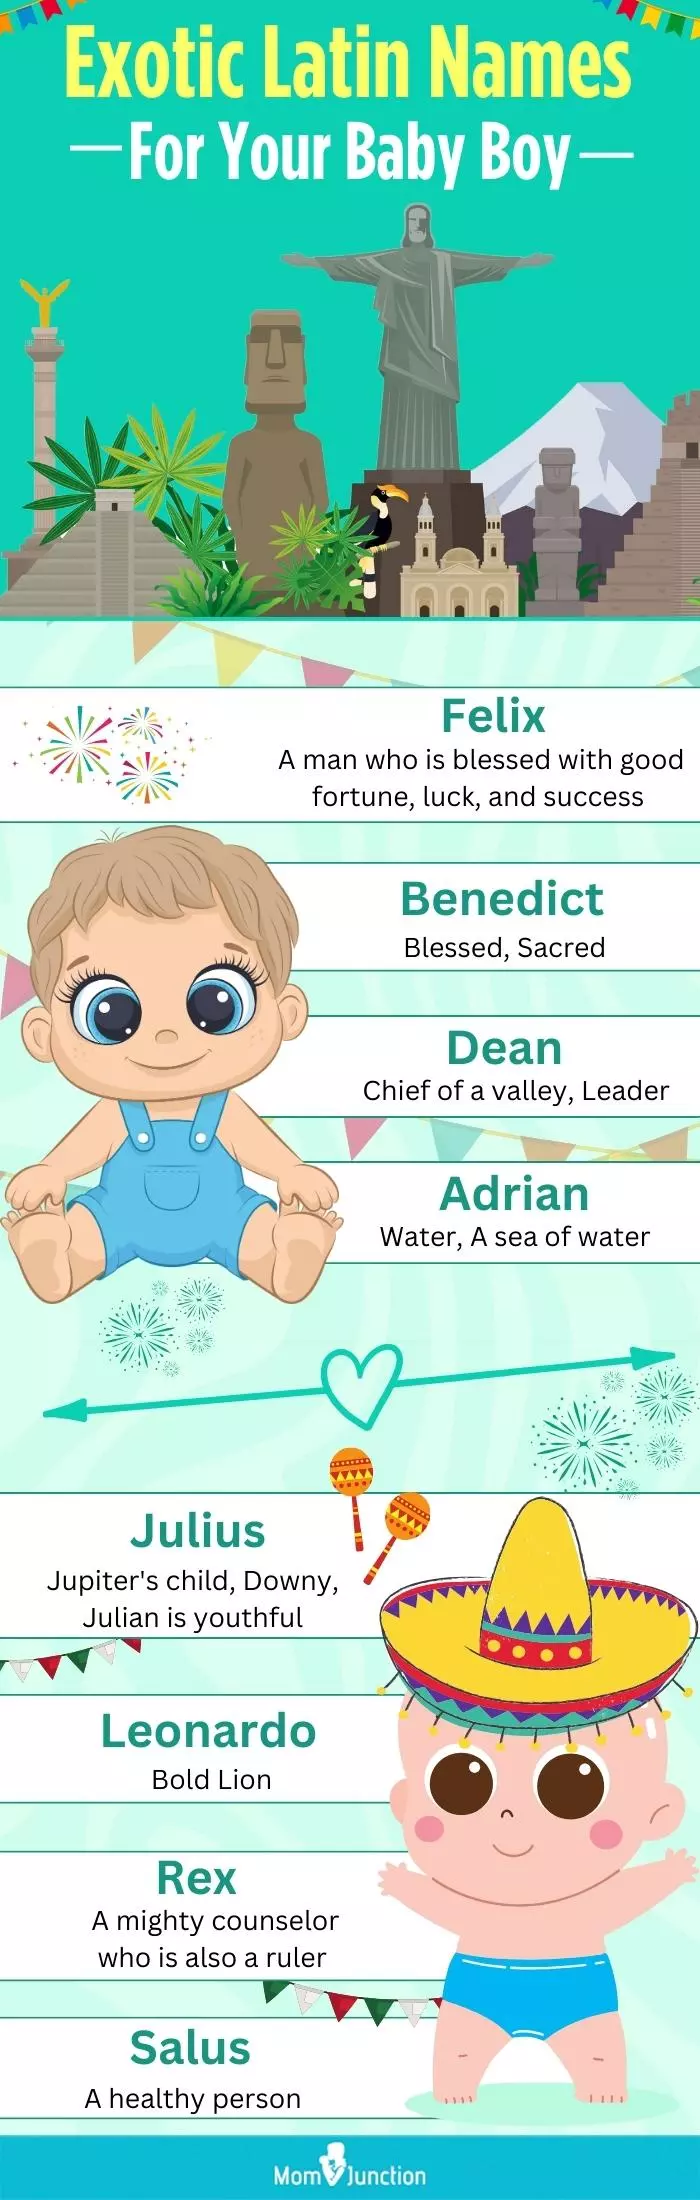 Latin Baby Boy Names With Meanings (infographic)